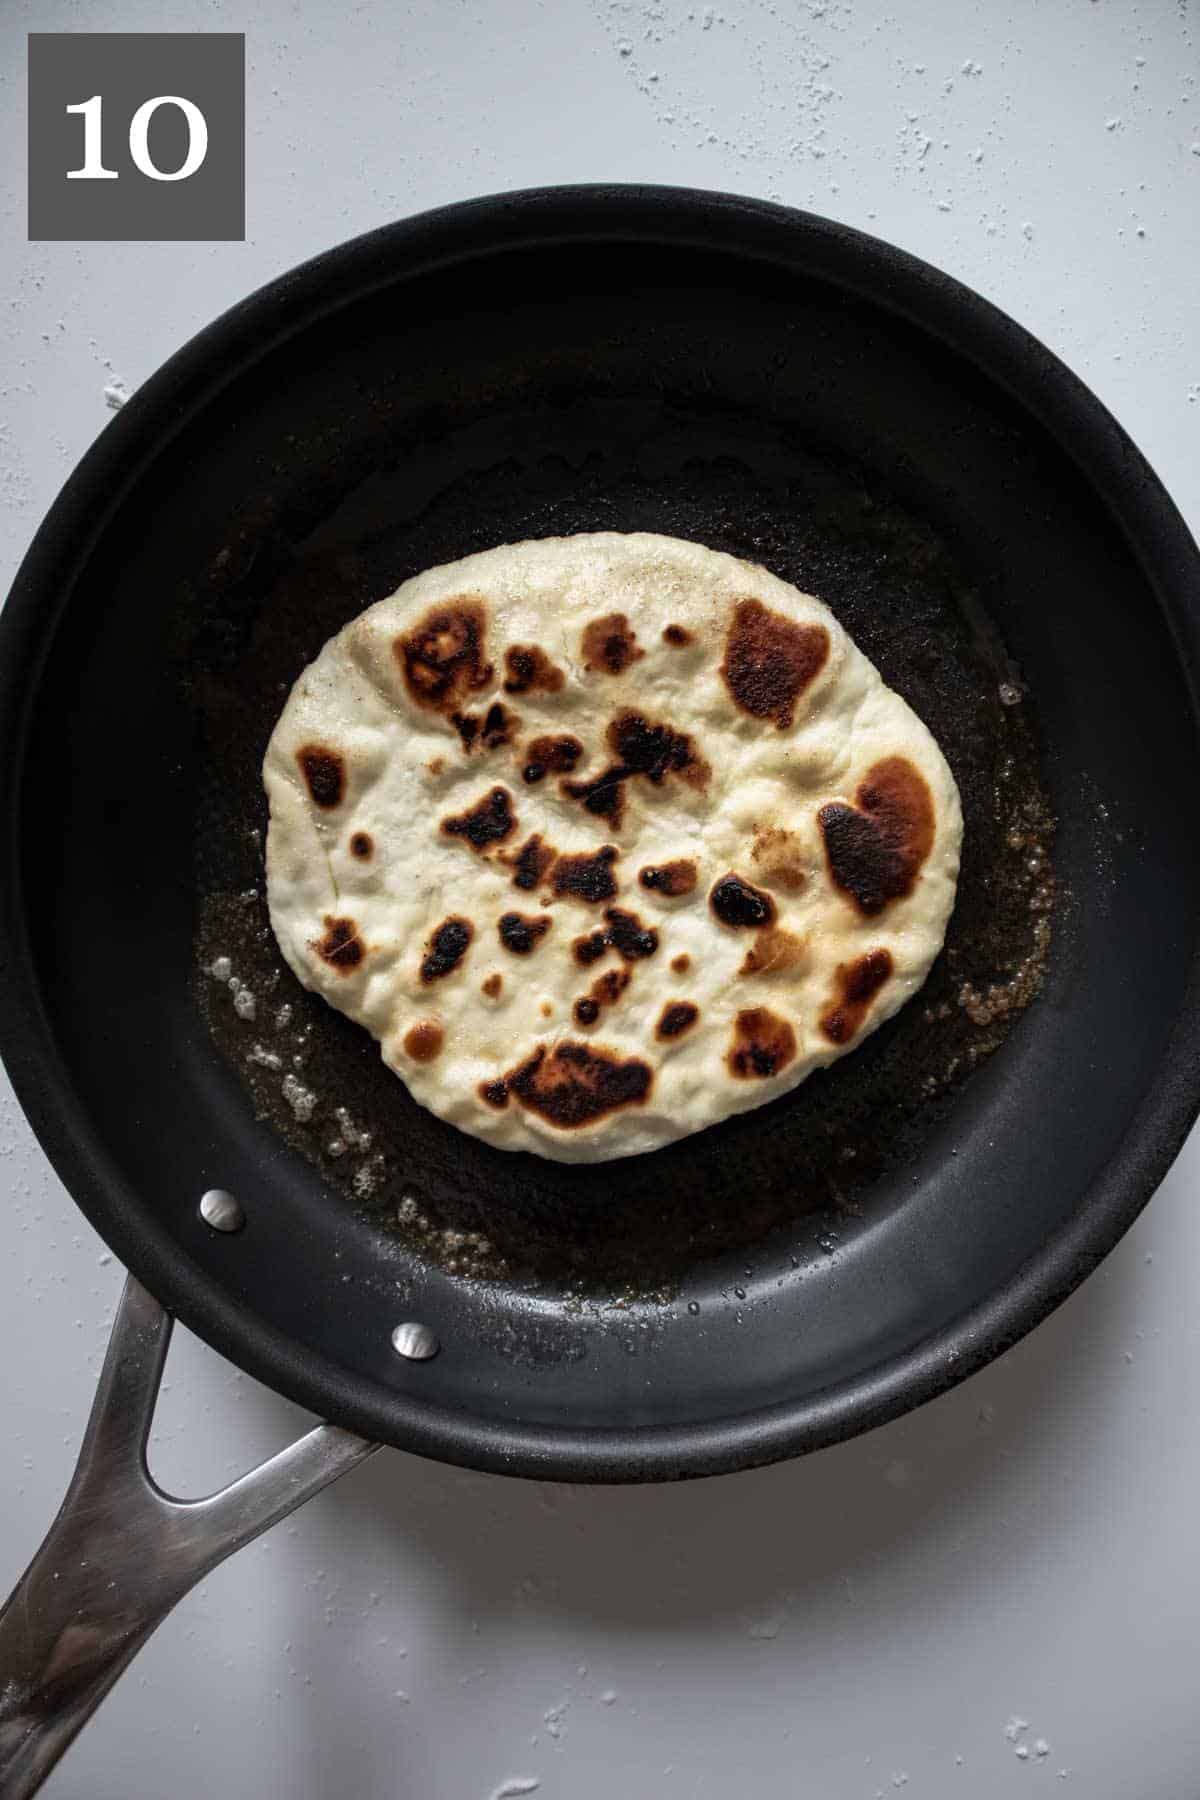 Bubbly gluten-free naan with big brown blisters.